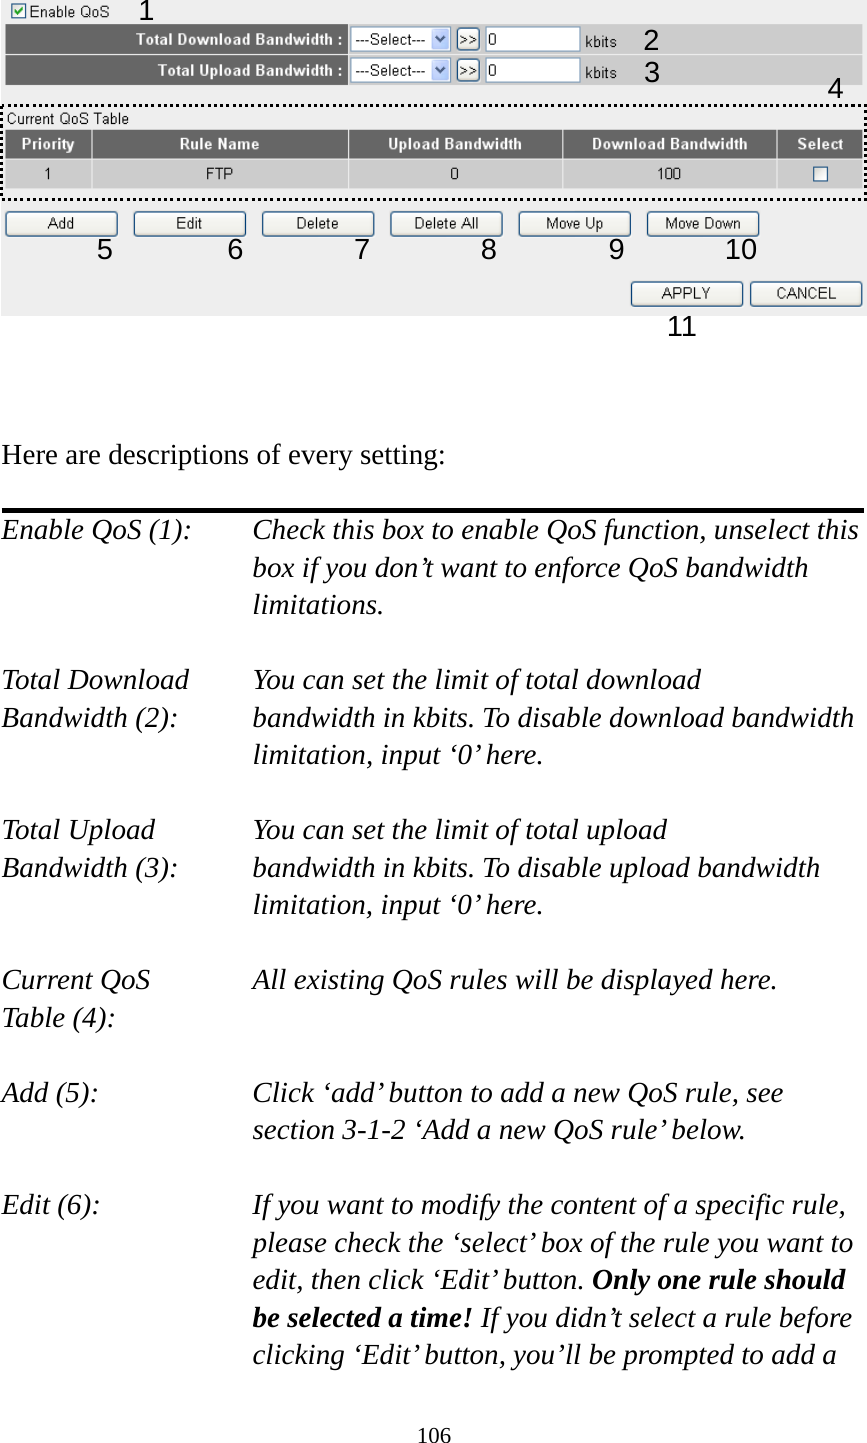 106      Here are descriptions of every setting:  Enable QoS (1):    Check this box to enable QoS function, unselect this box if you don’t want to enforce QoS bandwidth limitations.  Total Download    You can set the limit of total download   Bandwidth (2):    bandwidth in kbits. To disable download bandwidth limitation, input ‘0’ here.  Total Upload      You can set the limit of total upload Bandwidth (3):    bandwidth in kbits. To disable upload bandwidth limitation, input ‘0’ here.  Current QoS     All existing QoS rules will be displayed here. Table (4):    Add (5):  Click ‘add’ button to add a new QoS rule, see section 3-1-2 ‘Add a new QoS rule’ below.  Edit (6):    If you want to modify the content of a specific rule, please check the ‘select’ box of the rule you want to edit, then click ‘Edit’ button. Only one rule should be selected a time! If you didn’t select a rule before clicking ‘Edit’ button, you’ll be prompted to add a 1  2 34 5 6 7 8 9 10 11 